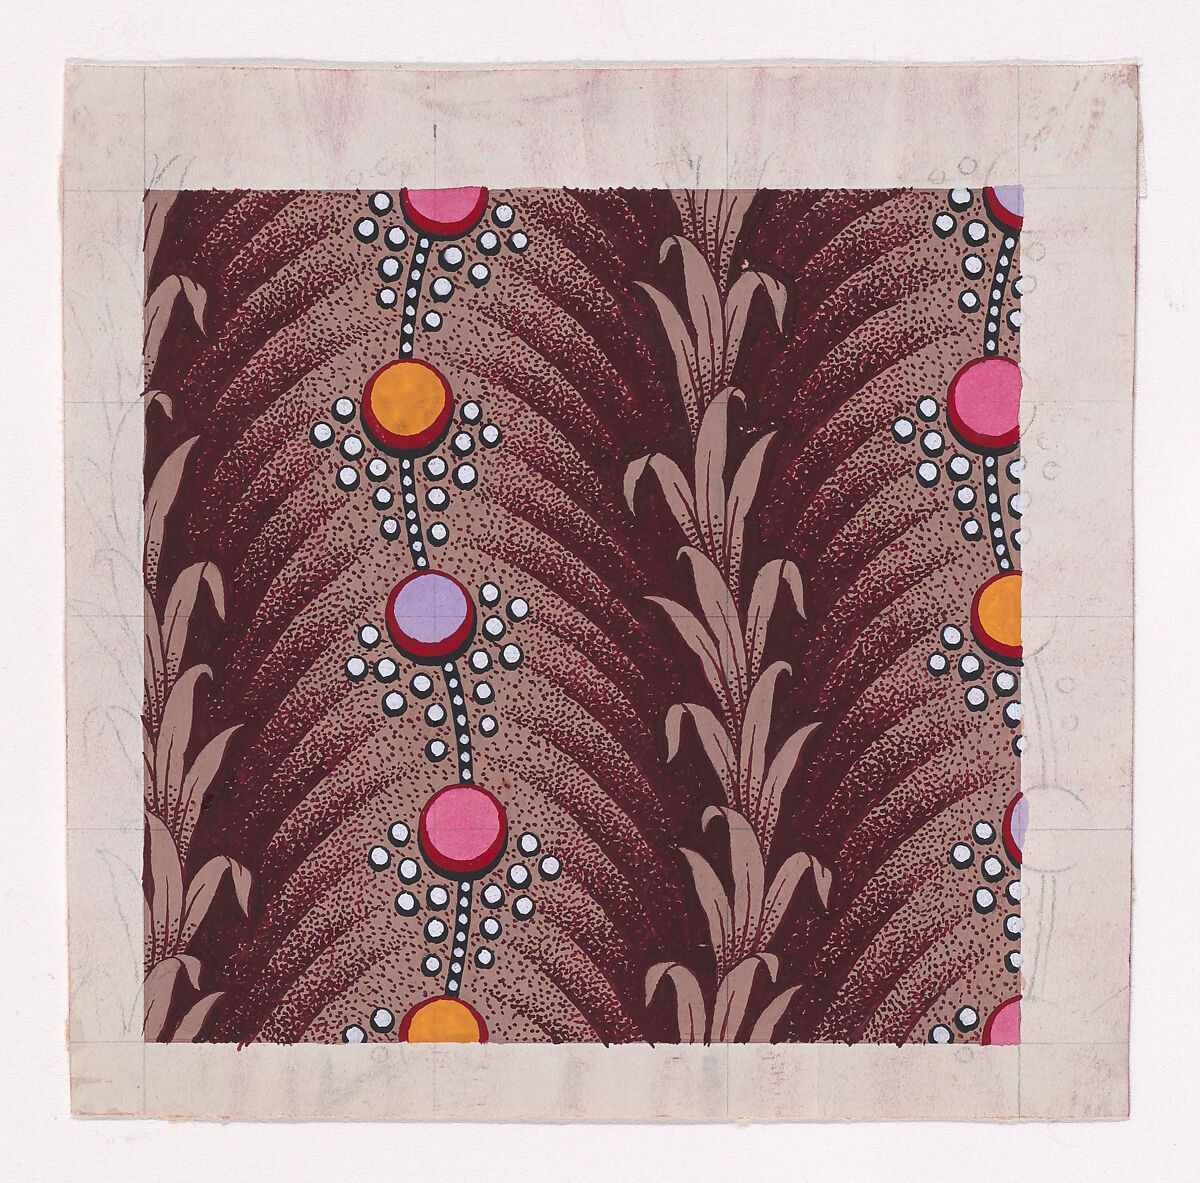 Textile Design with Alternating Vertical Garland of Stylized Leaves and Undulating Circles Surrounded by Pearls, Anonymous, Alsatian, 19th century, Gouache 